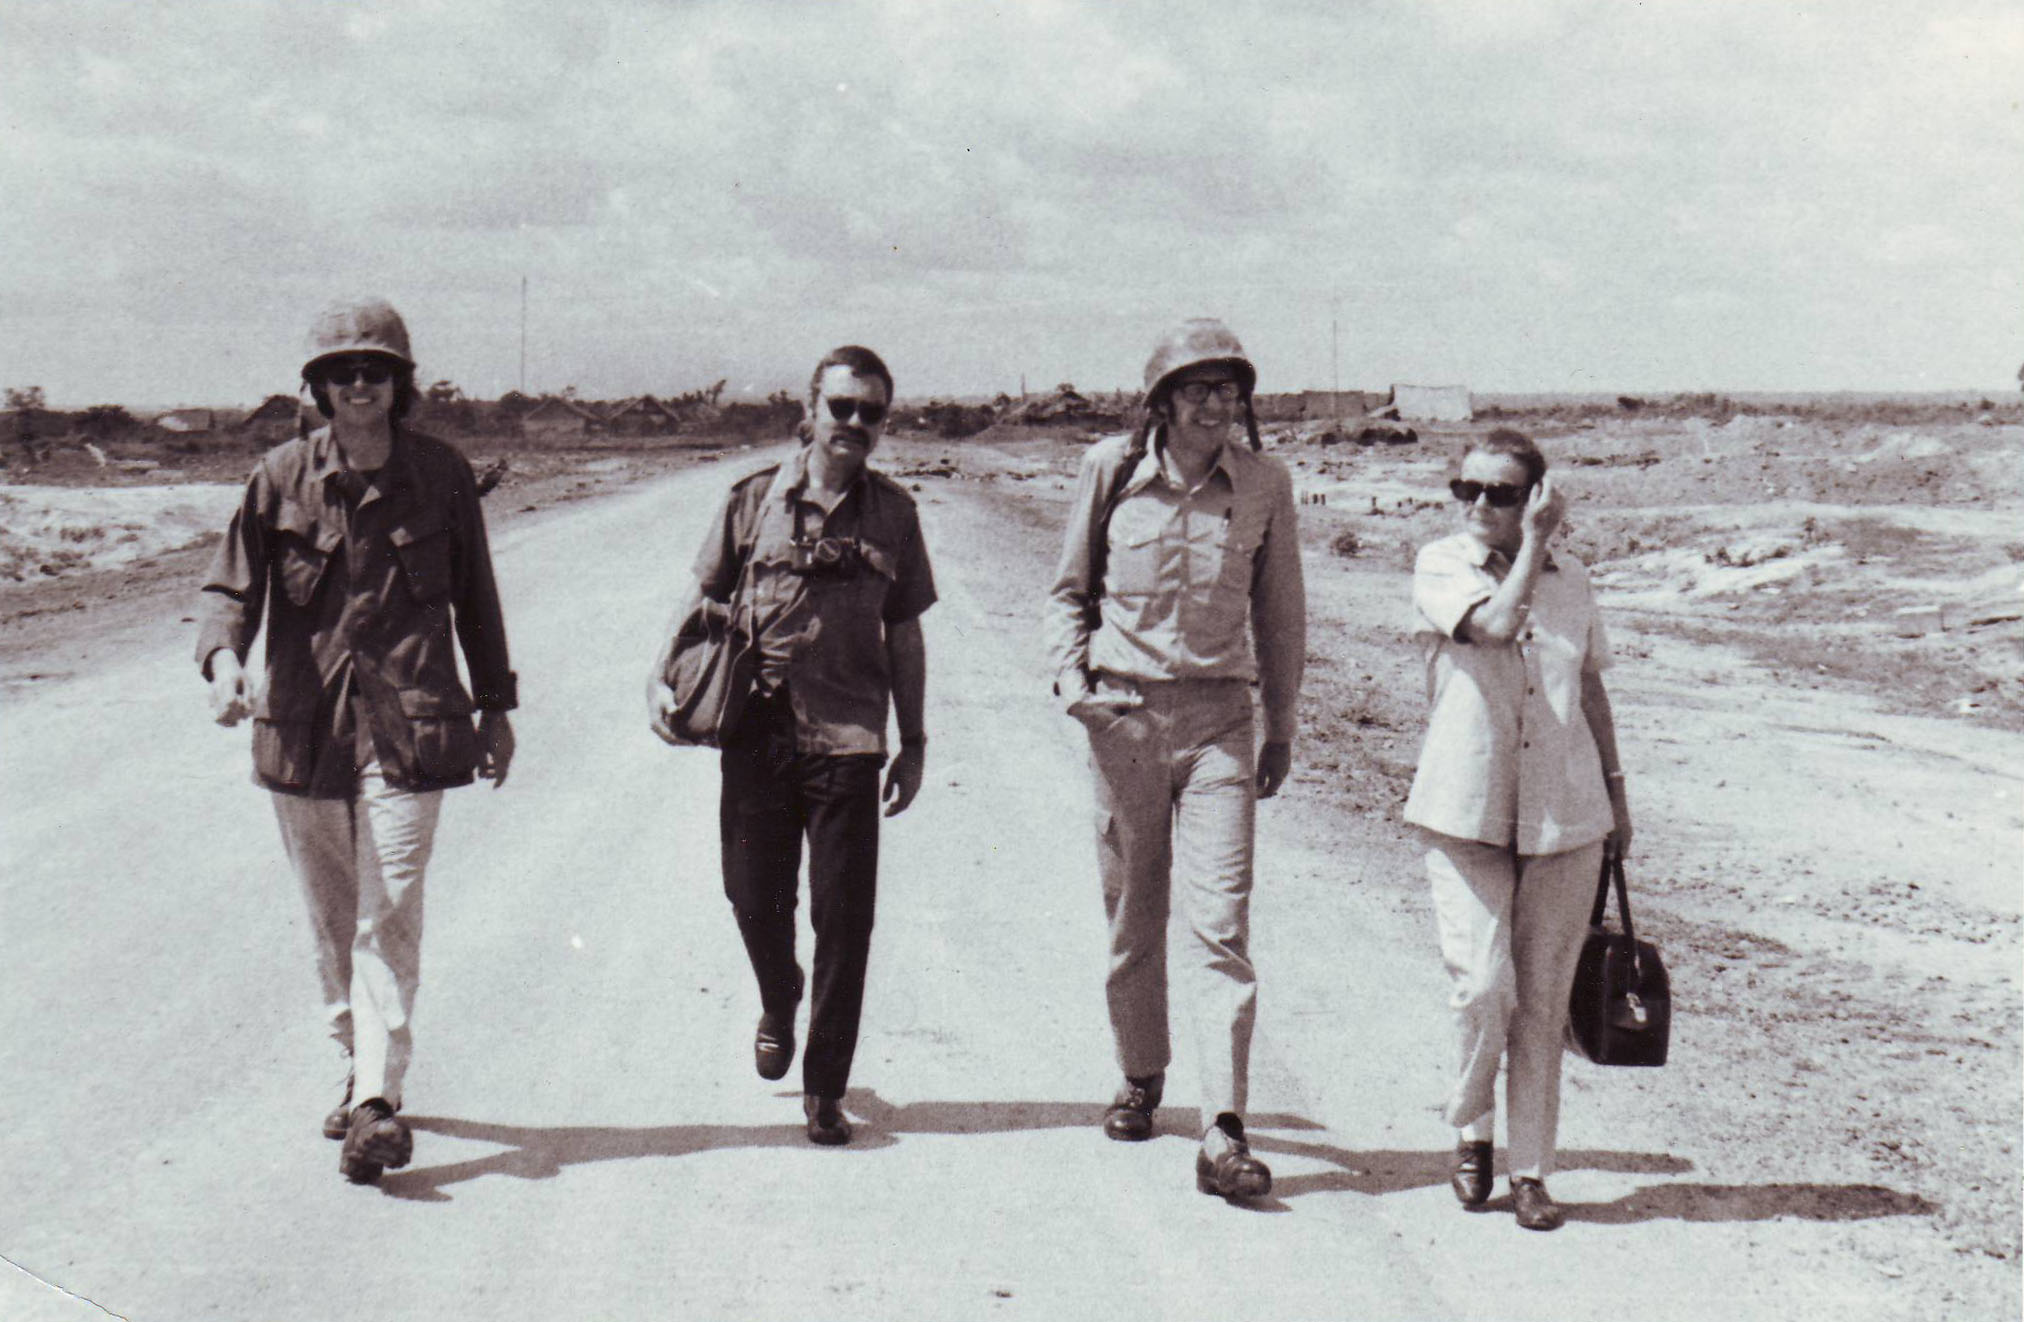 Clare Hollingworth with colleagues in Vietnam during the 1970s.